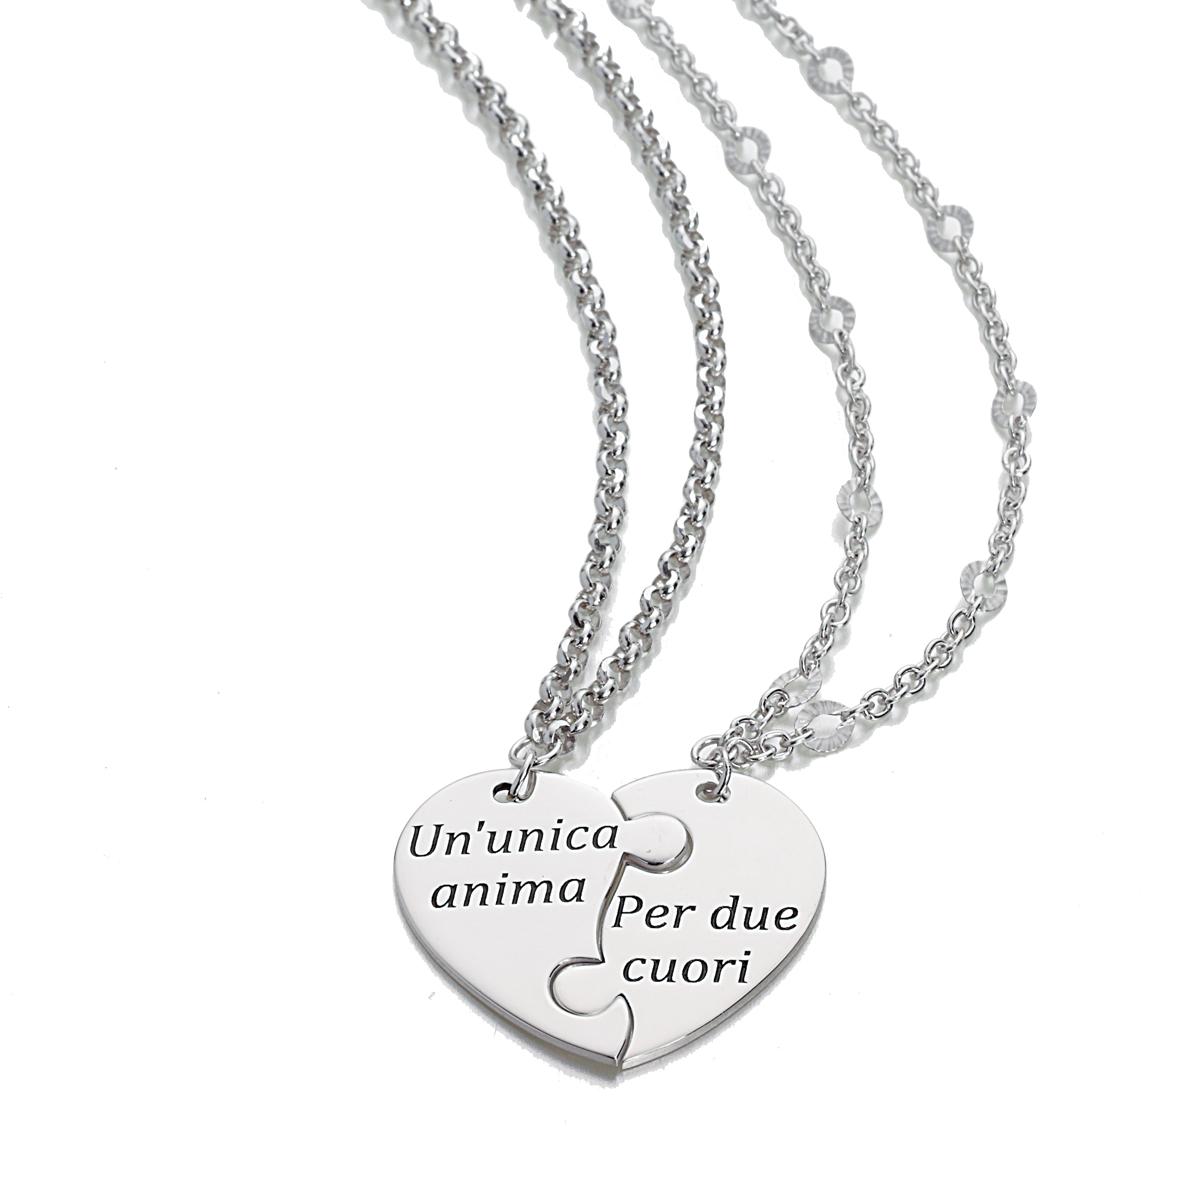 Two rhodium-plated silver necklaces - Perfect Valentine's Day gift - ZCL1358-MB